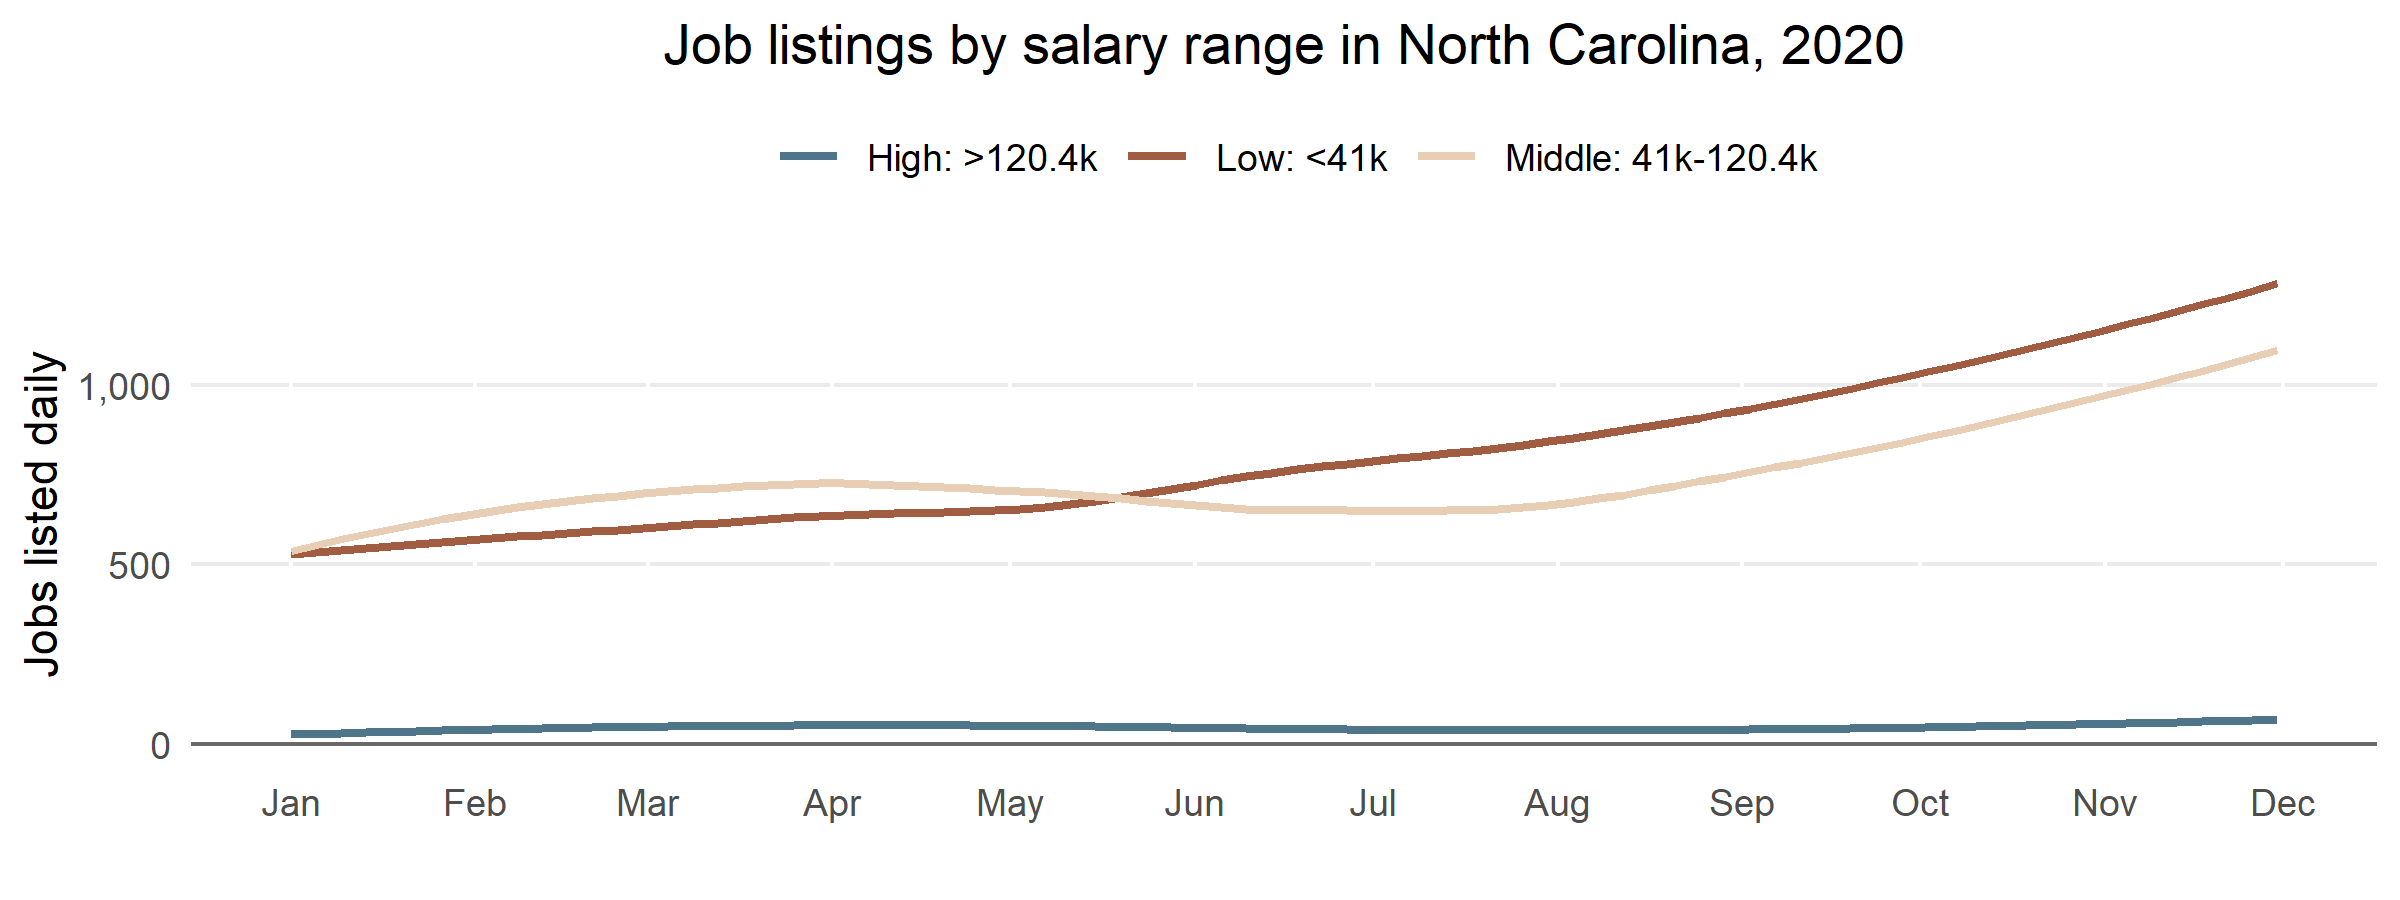 A 3-line line chart titled “Jobs listed across various salary ranges.”  It has three lines representing lower than 41K, 41K-120.4K, and higher than 120.4, in terms of thousands of dollars paid per year.  The y-axis is the number of daily jobs posted, ranging from 0 to 1,500. The x-axis is the date, ranging from January 2020 to October 2020.  The low category trended upwards throughout the period.  The middle category trended upwards, then trended downwards from April through July, and then trended upwards again. The high category did not move much during the date range.